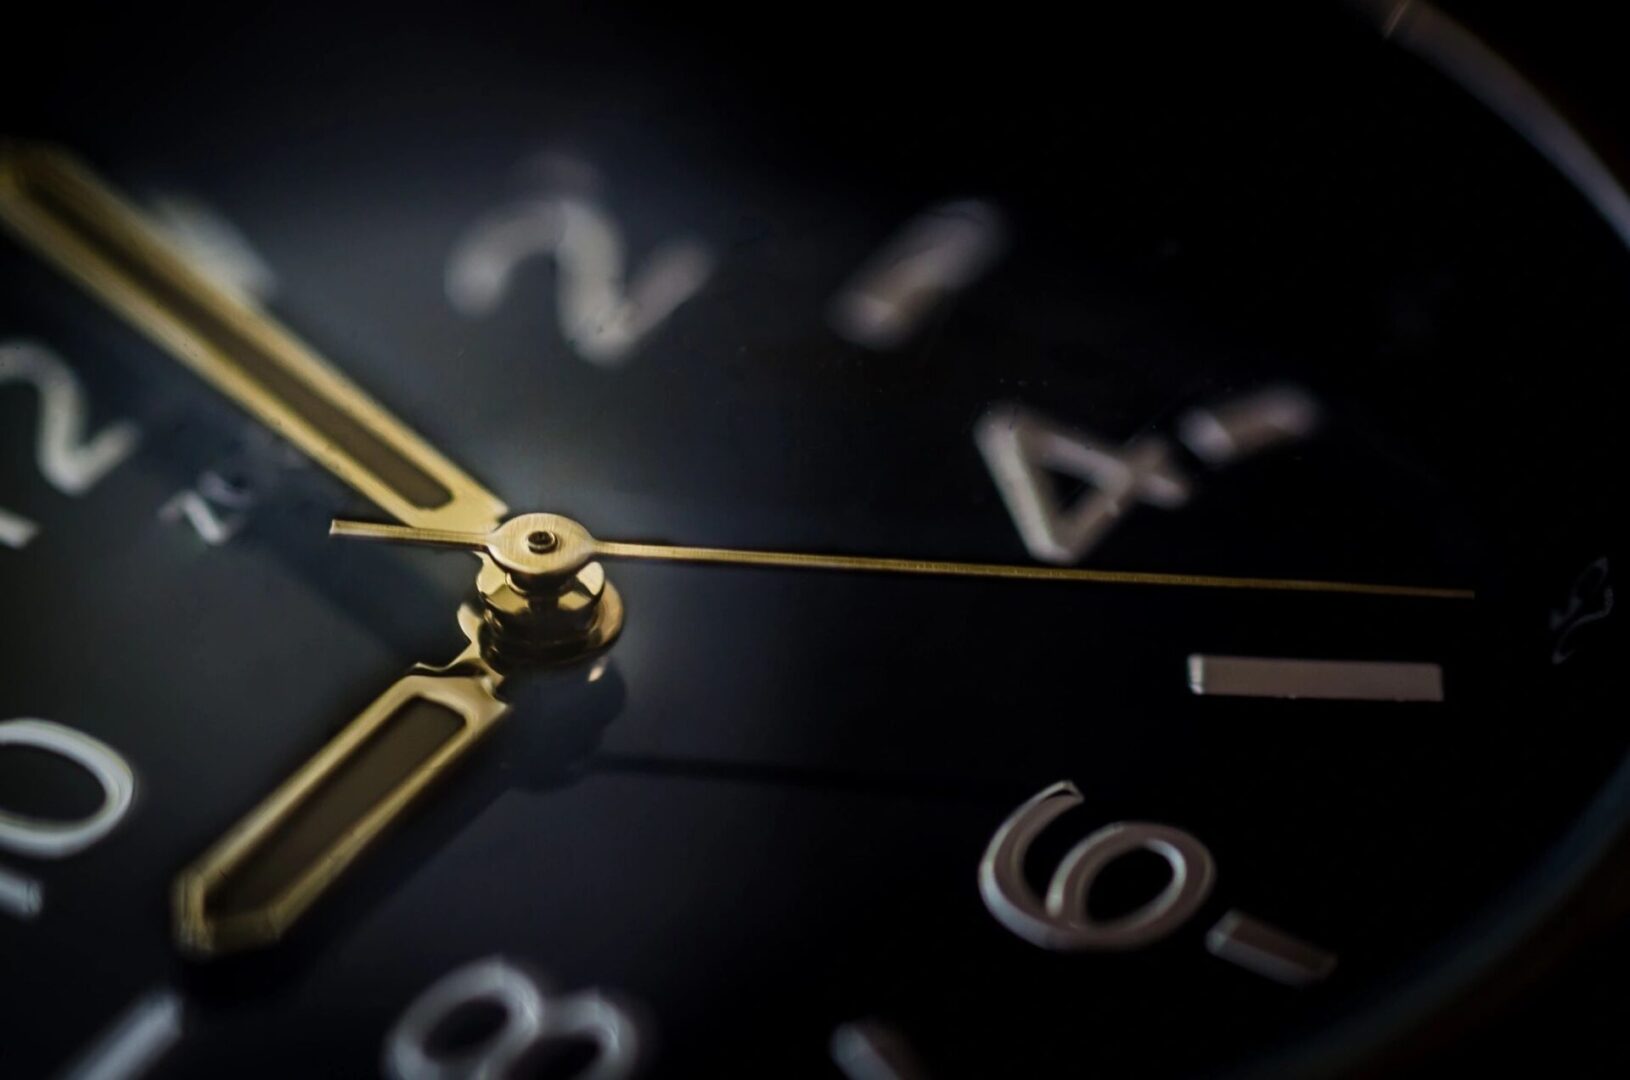 A close up of a clock on a black background.